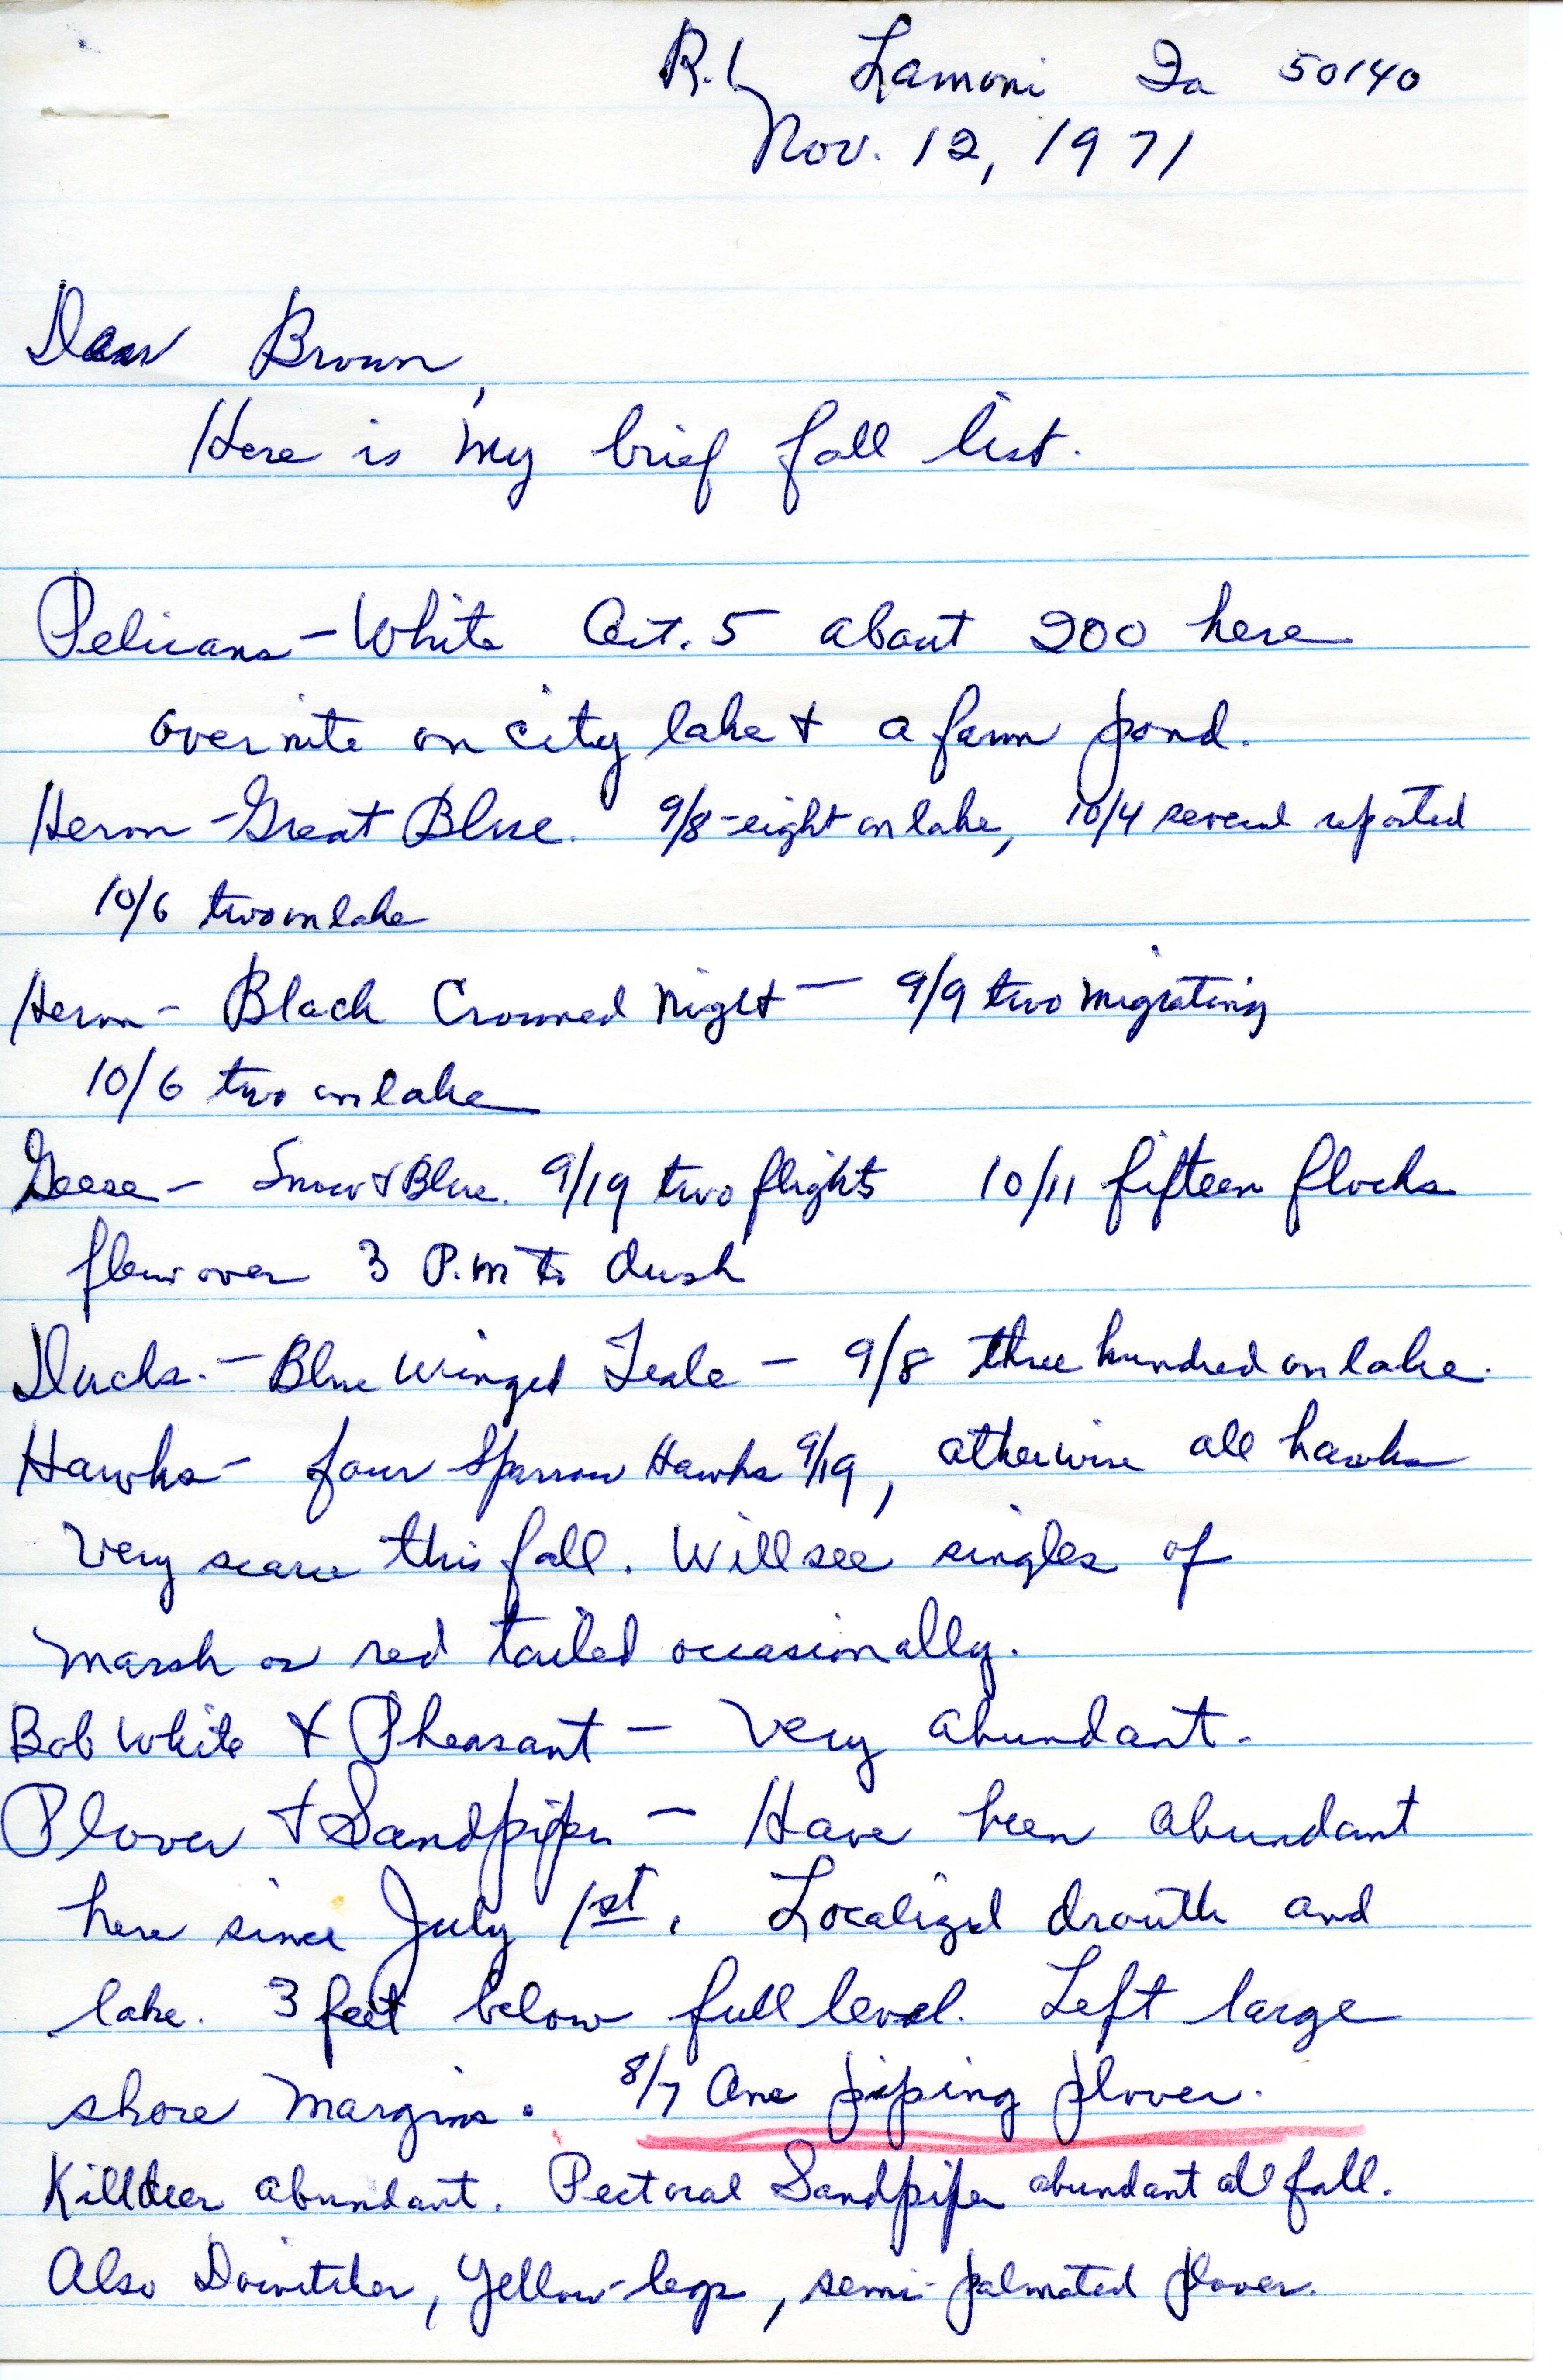 J. Donald Gillaspey letter to Woodward H. Brown regarding birds sighted during fall 1971, November 12, 1971